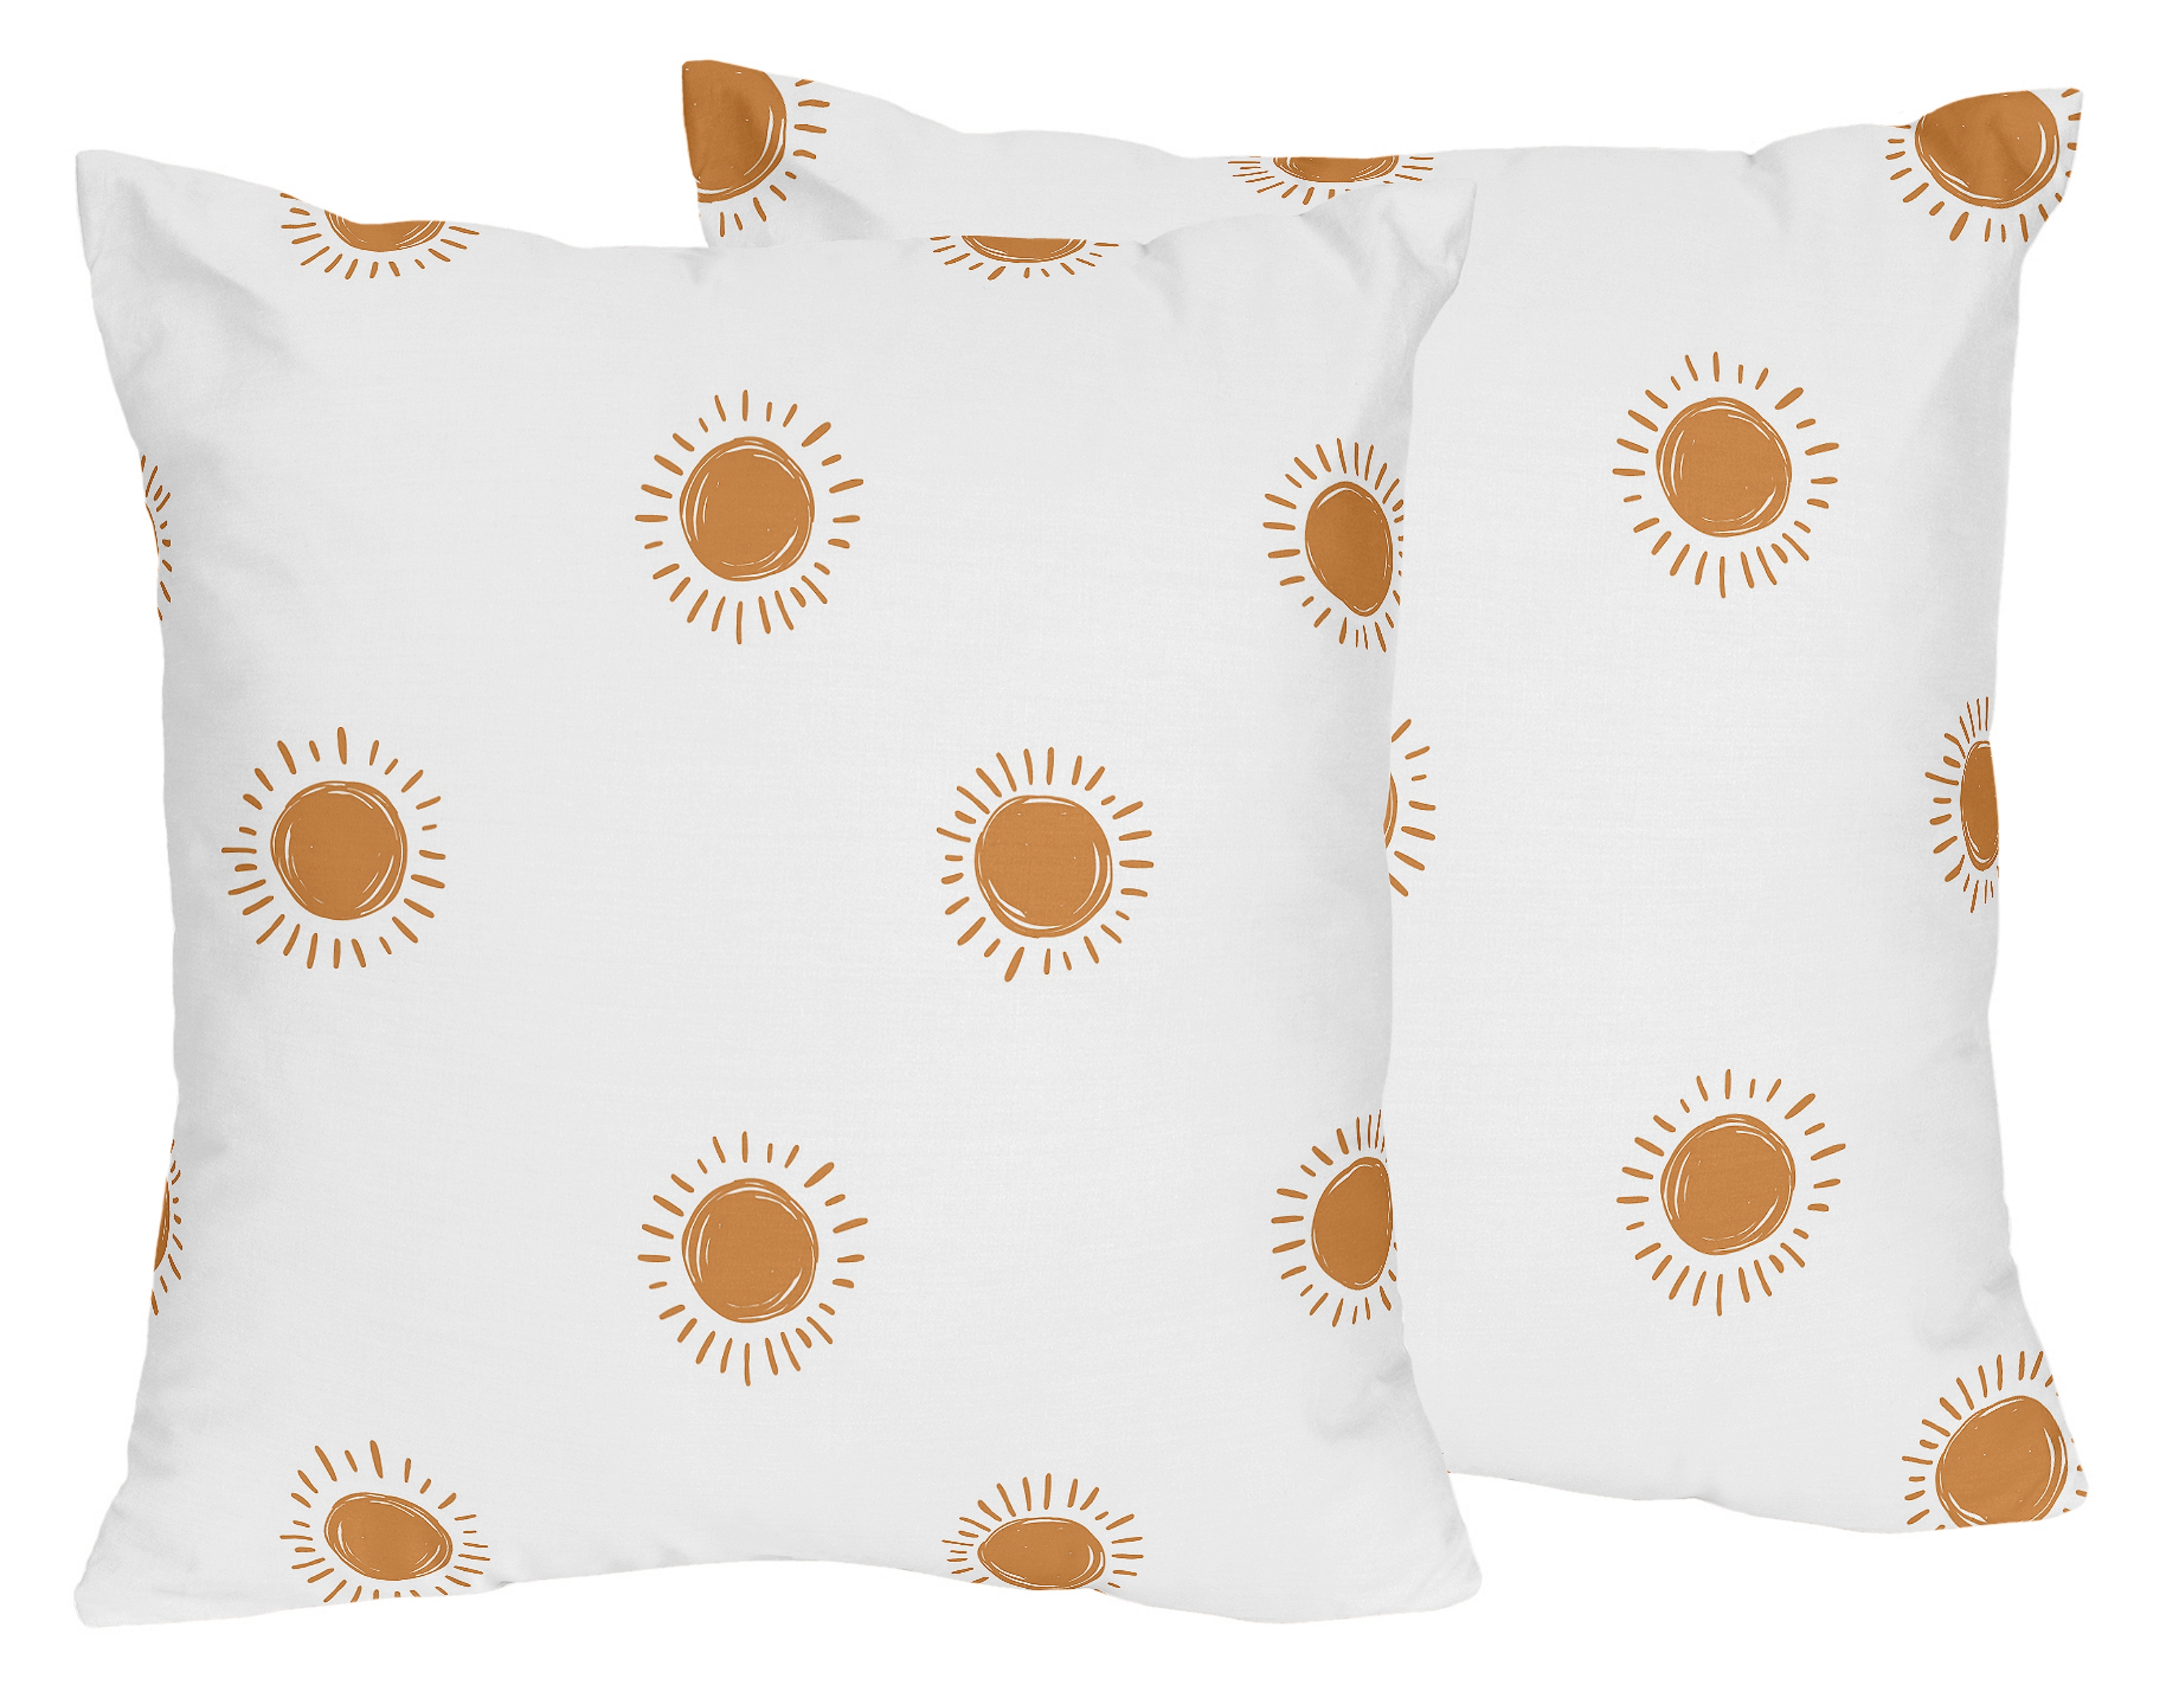 Boho Sun White and Pumpkin 18in Square Decorative Throw Pillows (Set of 2) by Sweet Jojo Designs - image 1 of 1